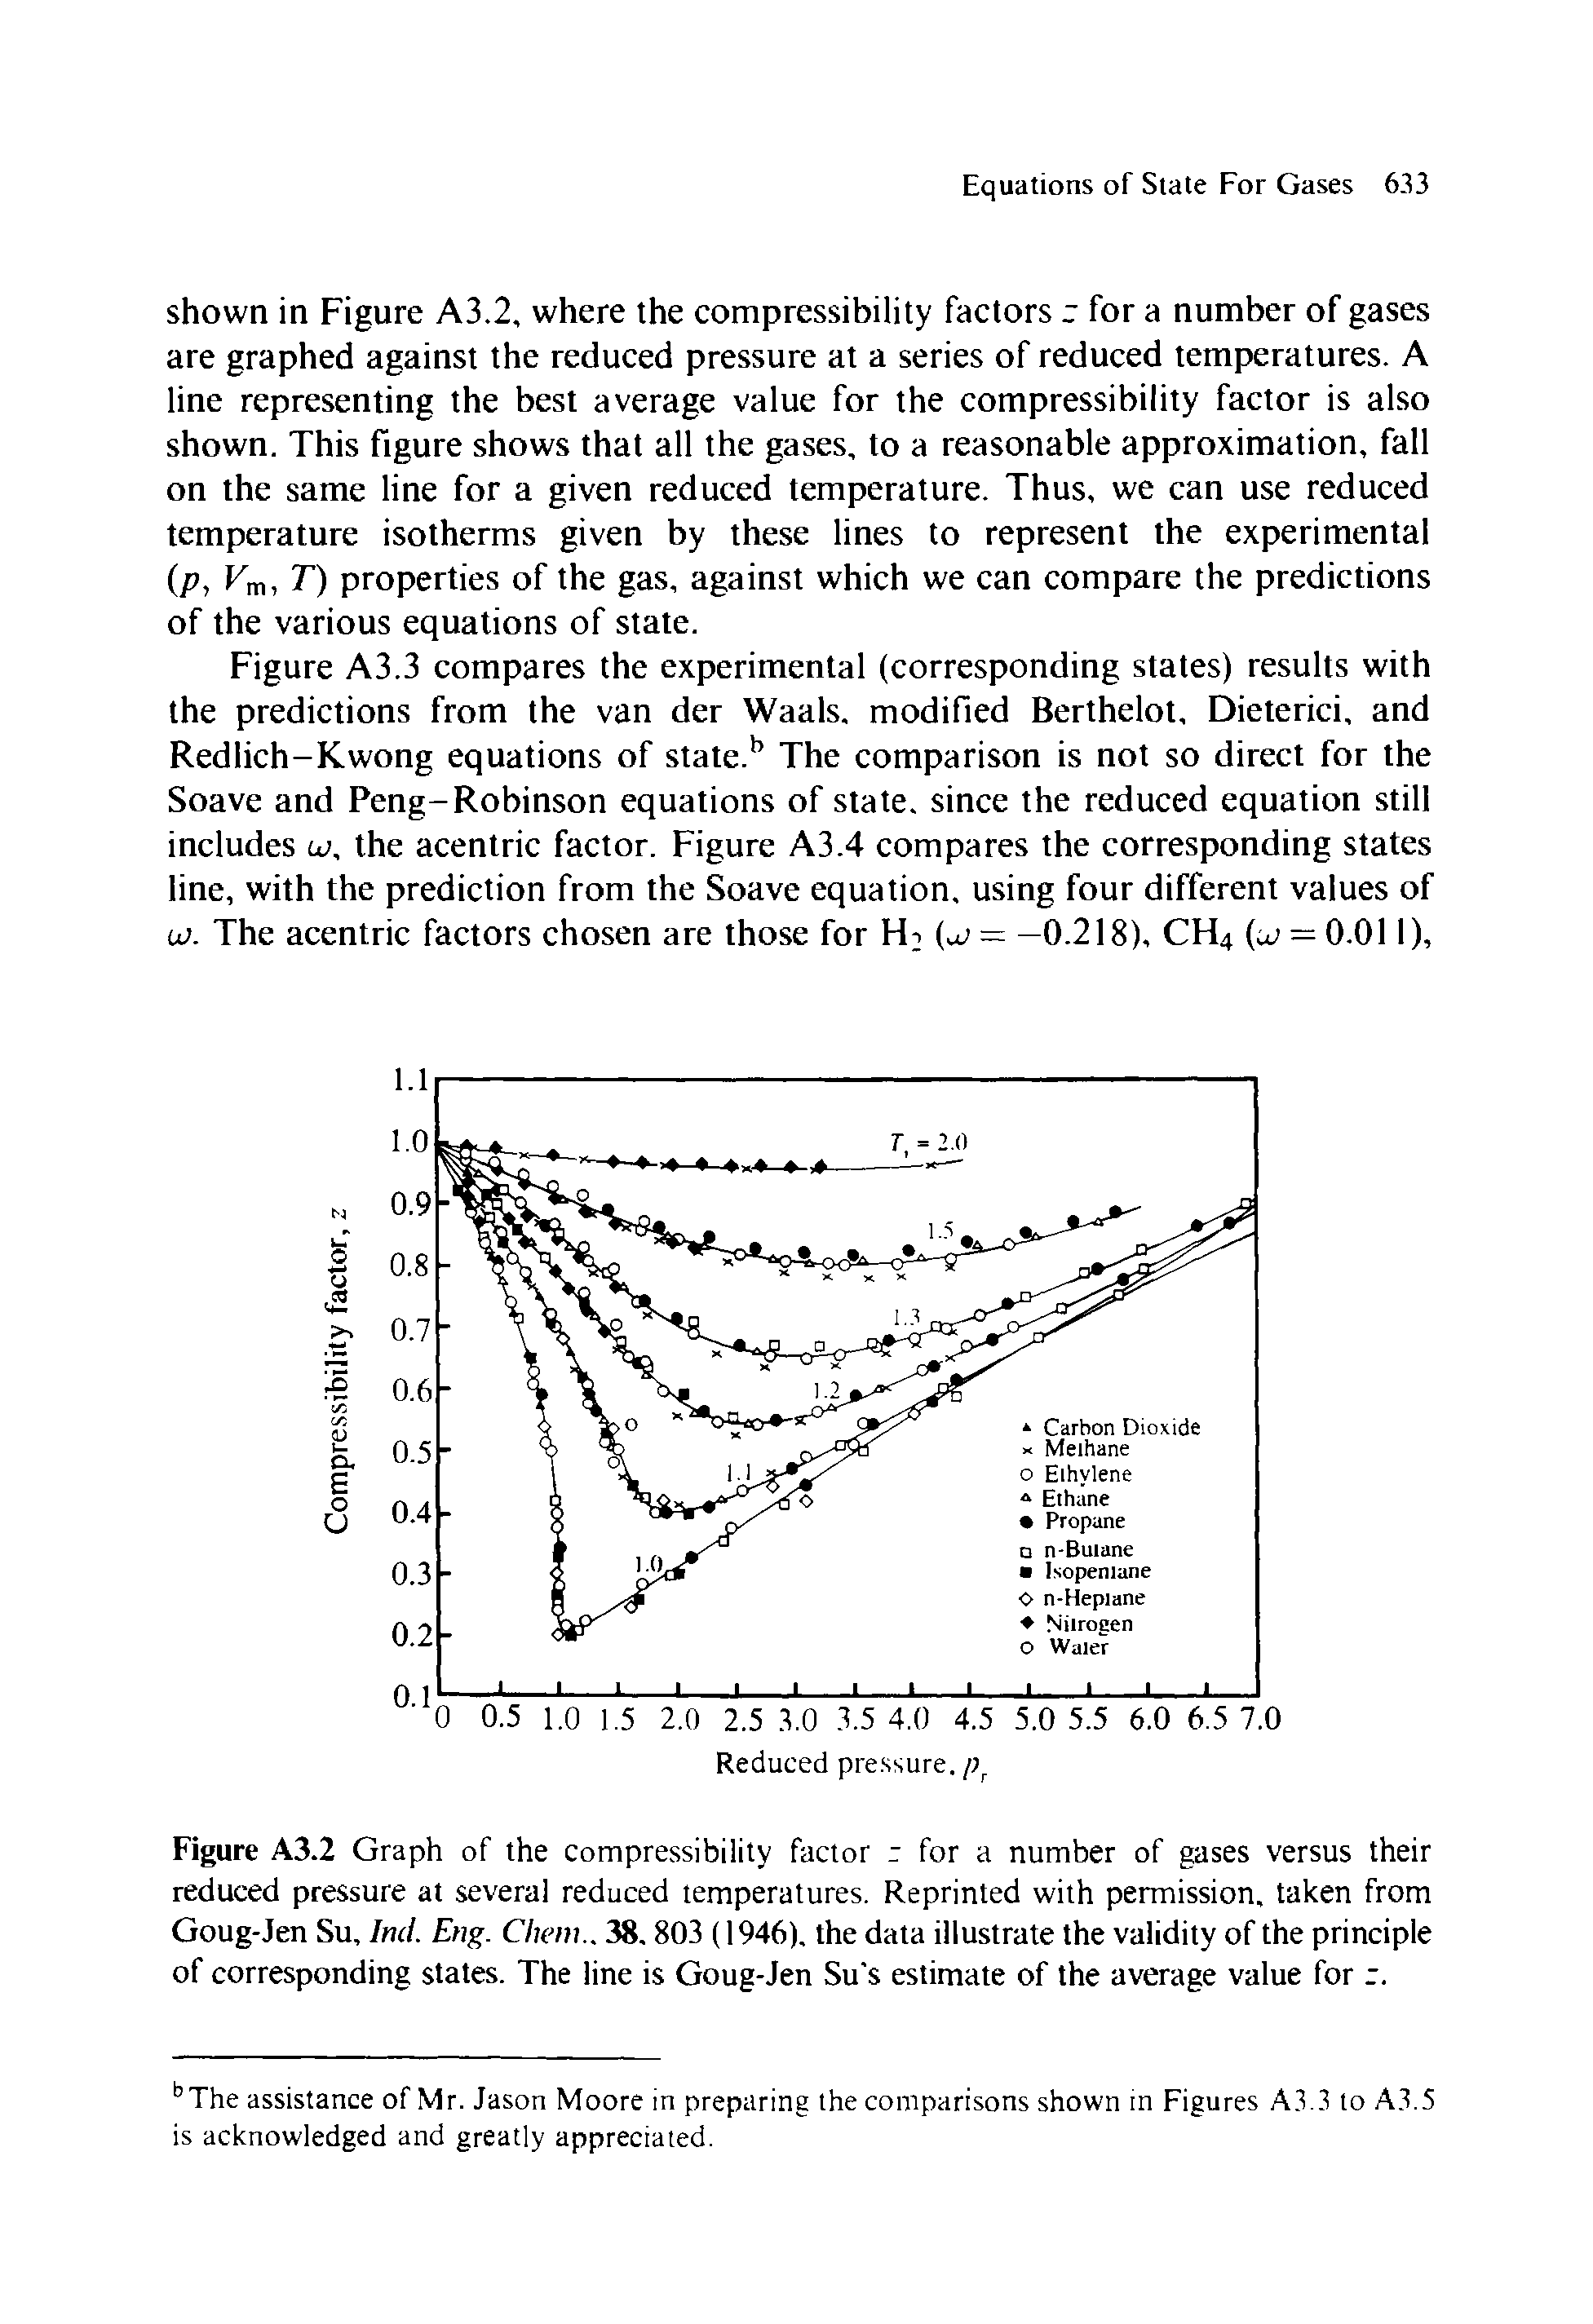 Figure A3.3 compares the experimental (corresponding states) results with the predictions from the van der Waals. modified Berthelot, Dieterici, and Redlich-Kwong equations of state.b The comparison is not so direct for the Soave and Peng-Robinson equations of state, since the reduced equation still includes to, the acentric factor. Figure A3.4 compares the corresponding states line, with the prediction from the Soave equation, using four different values of to. The acentric factors chosen are those for H (o> = —0.218), CH4 (to = 0.011),...